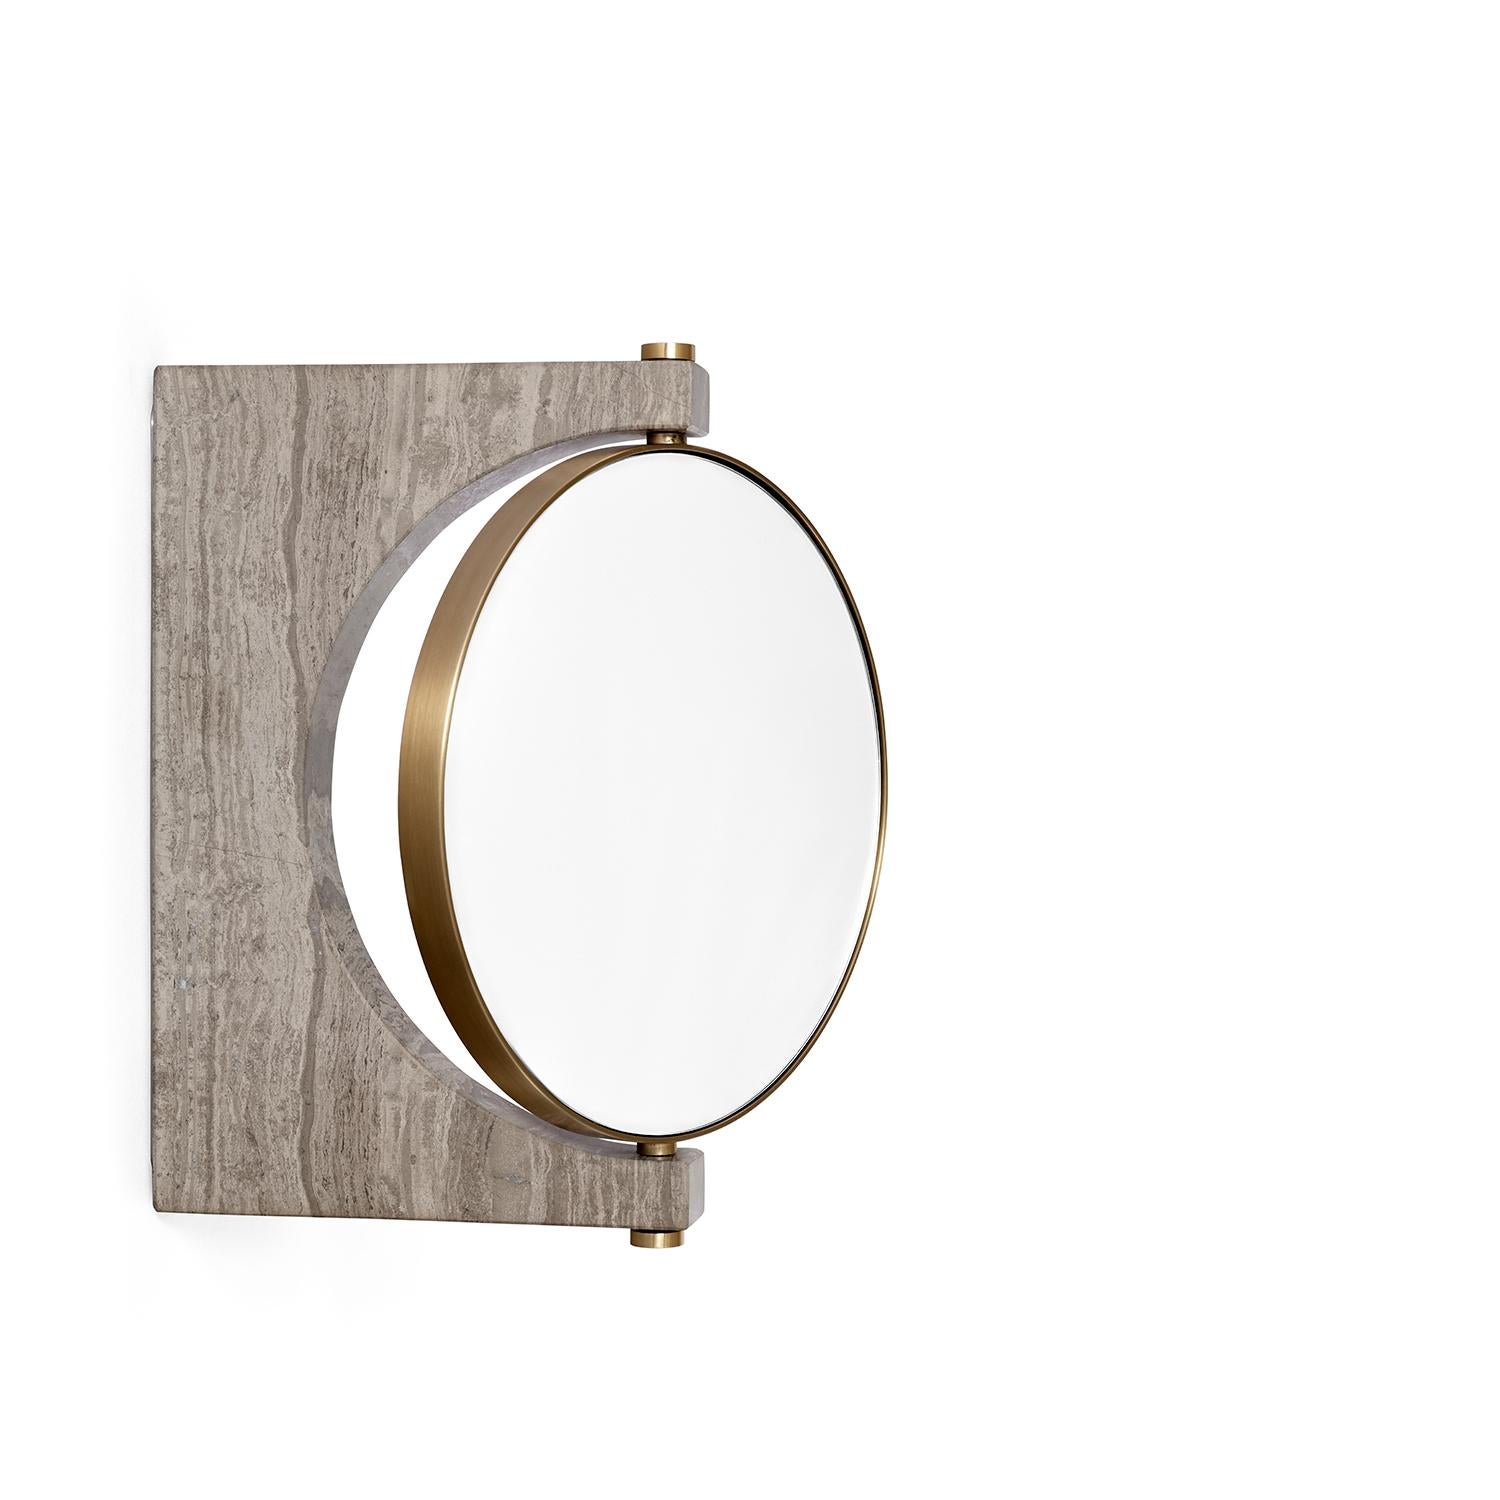 The Classic standing mirror gets a functionalist update with this new wall attachment. The focus on materials and quality makes the Pepe marble mirror timeless.

The Pepe marble mirror, designed by Milan-based firm Studiopepe, is an elegant study